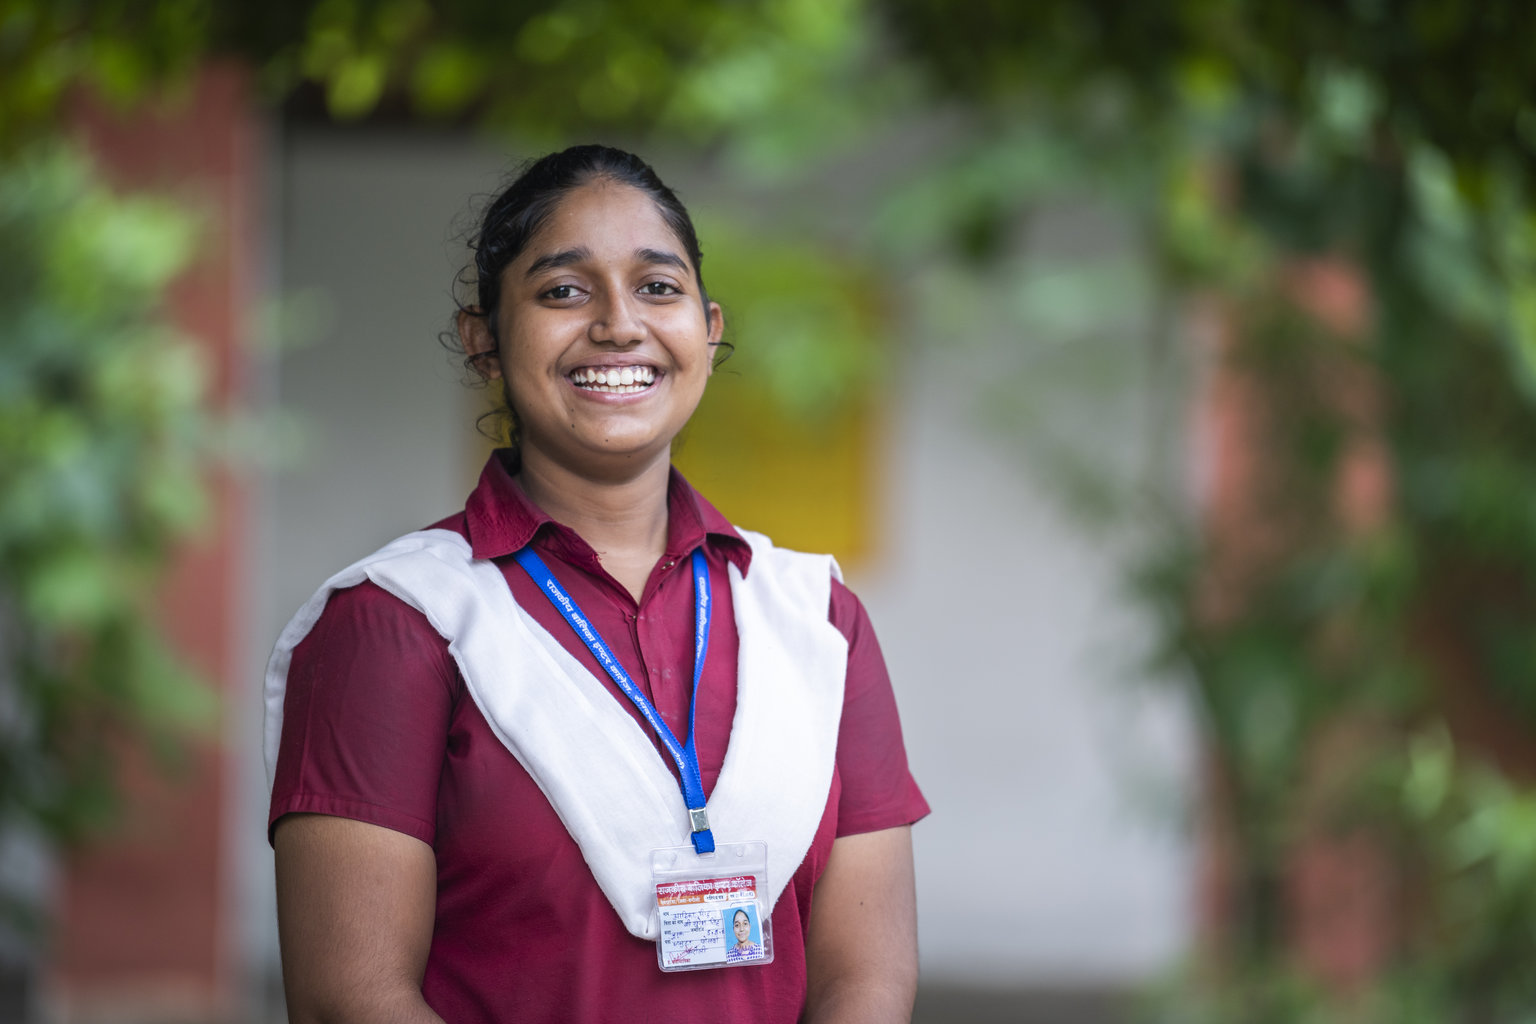  A teenage girl smiles to the camera. She is wearing her school uniform and is standing outside her school.